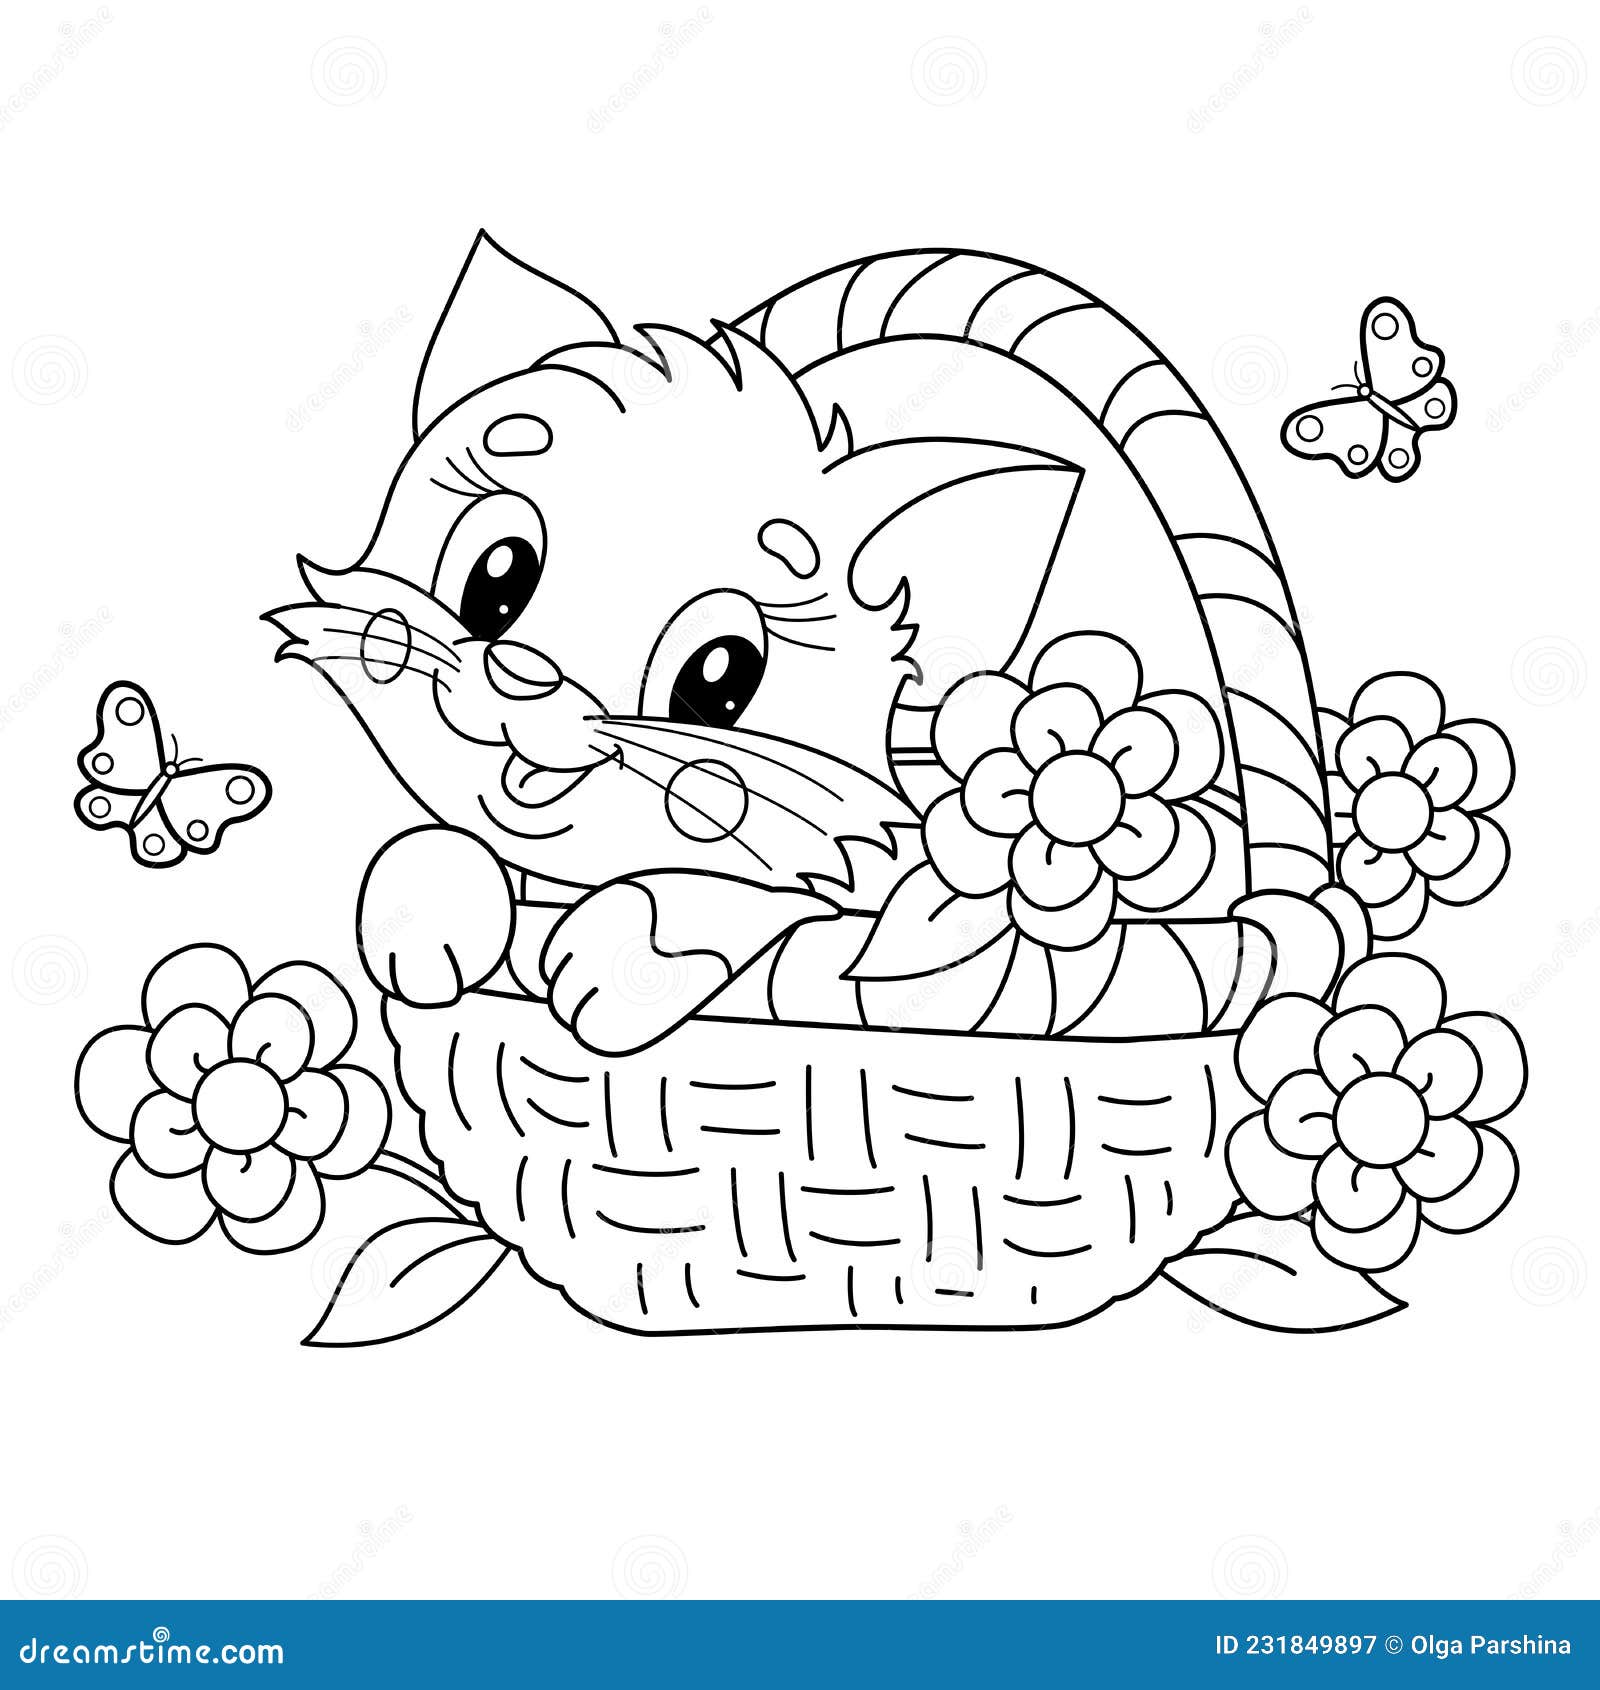 Coloring page outline of cartoon little cat in flower basket fluffy gift cute kitten pet stock vector